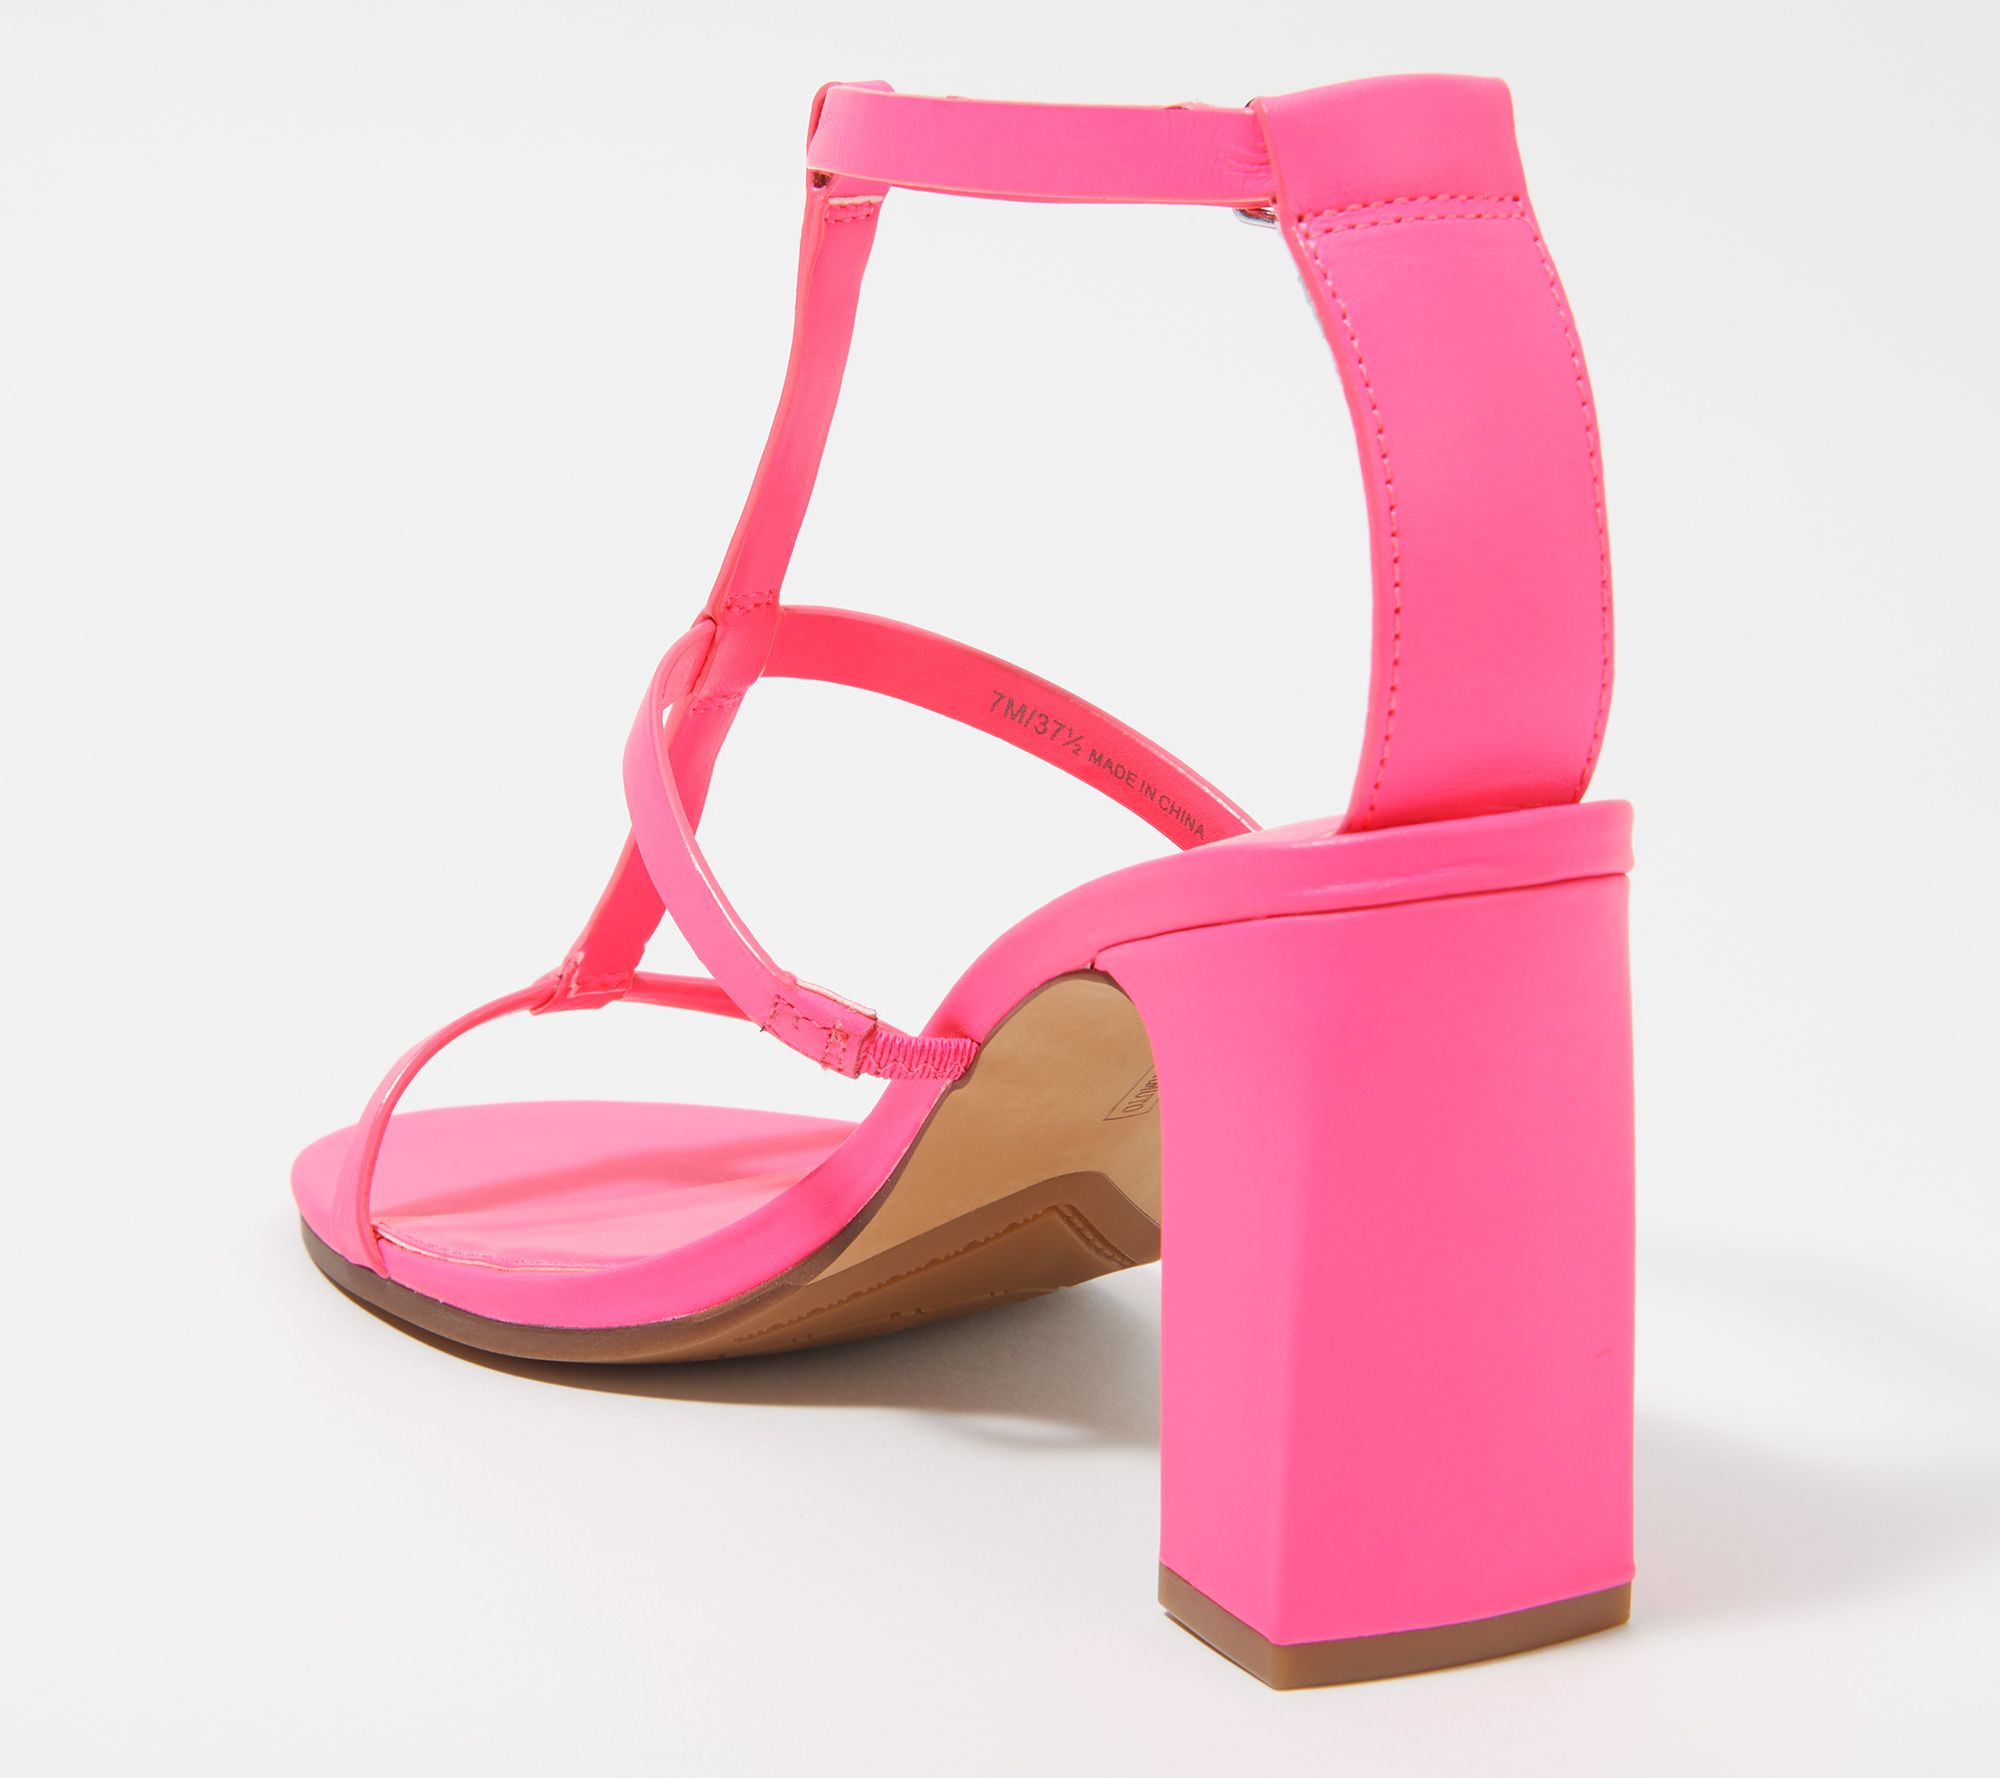 Vince Camuto Leather Strappy Heeled Sandals - Belindah - QVC.com